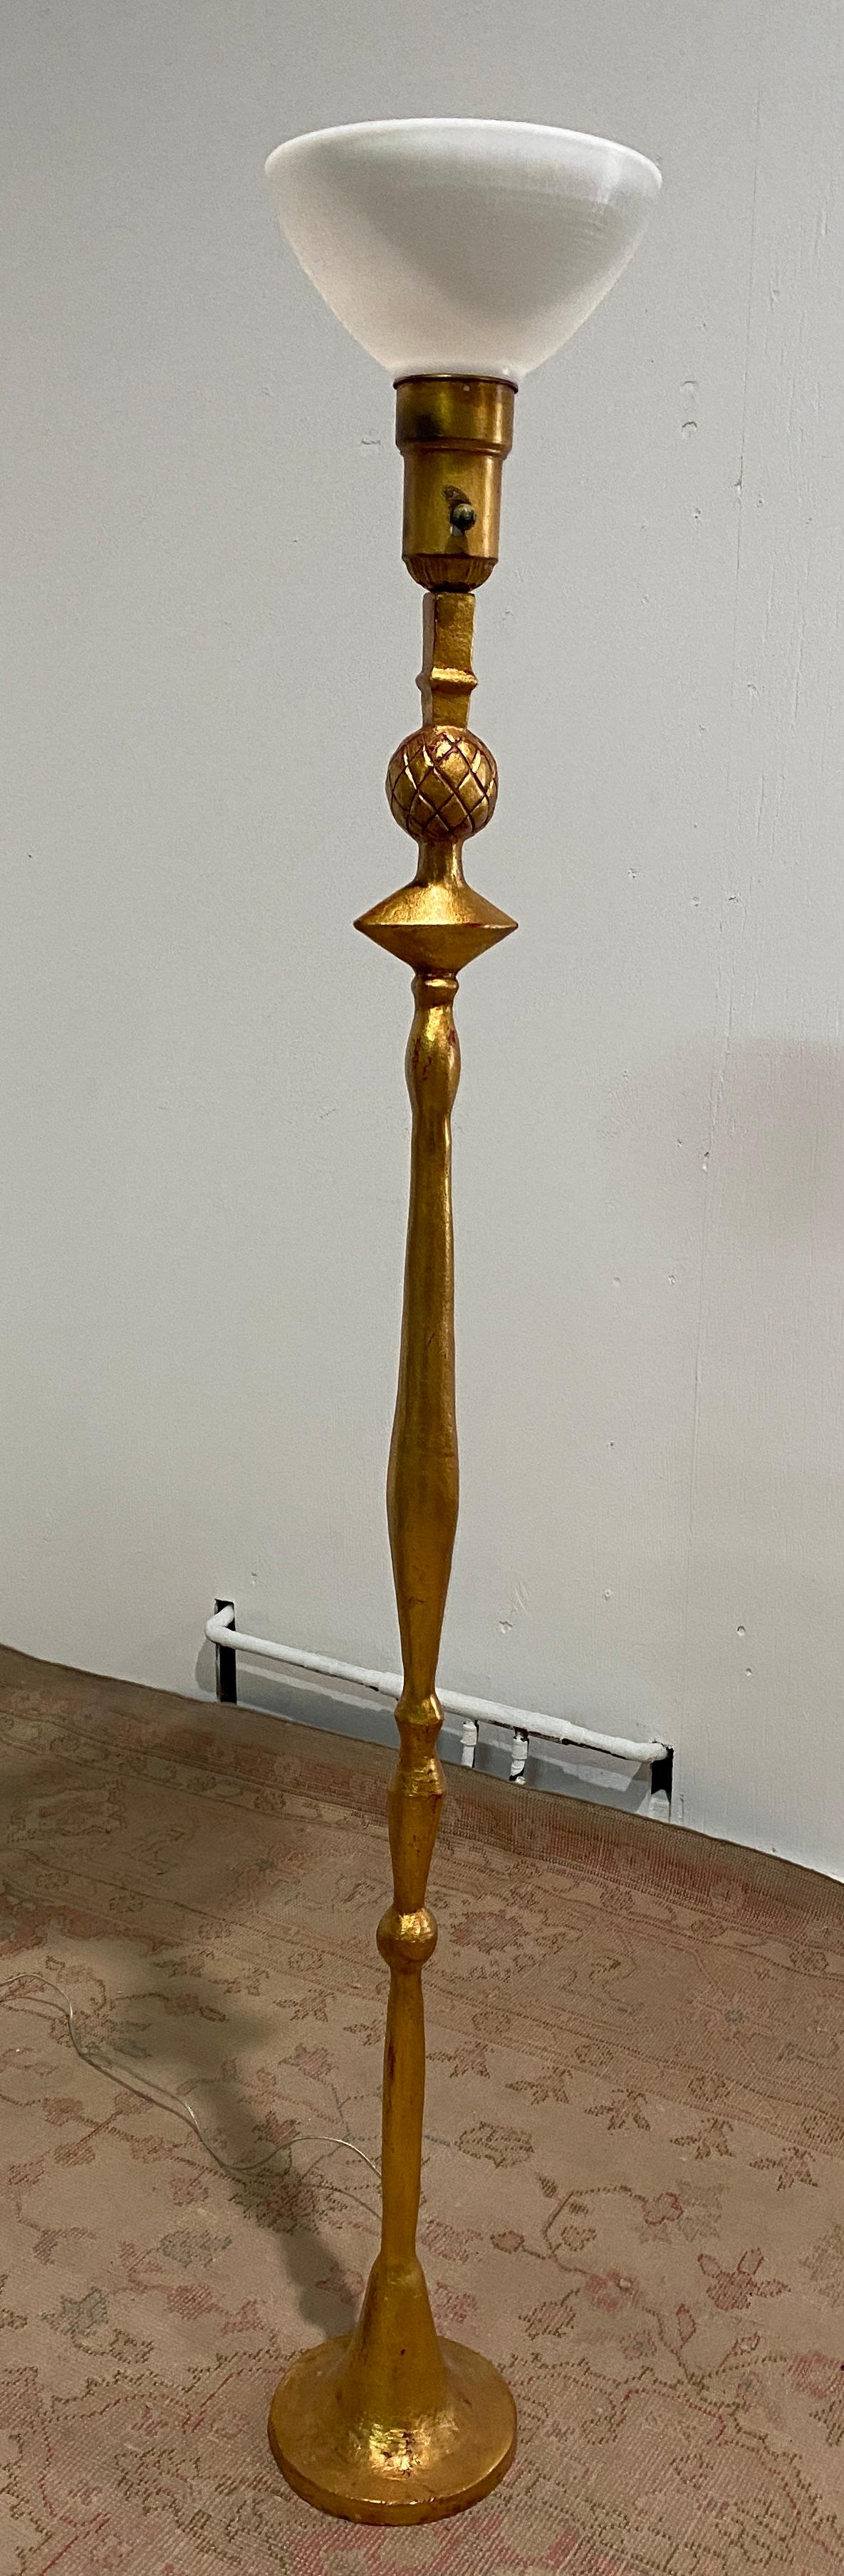 This tall Torchere was produced by Frances Elkins 
The gilding has a lovely aged patina with some loss. The casting is crisp and
true to the original design. Spotty loss to surface, some wear. General marks,
scratches rubbing etc. All shown on